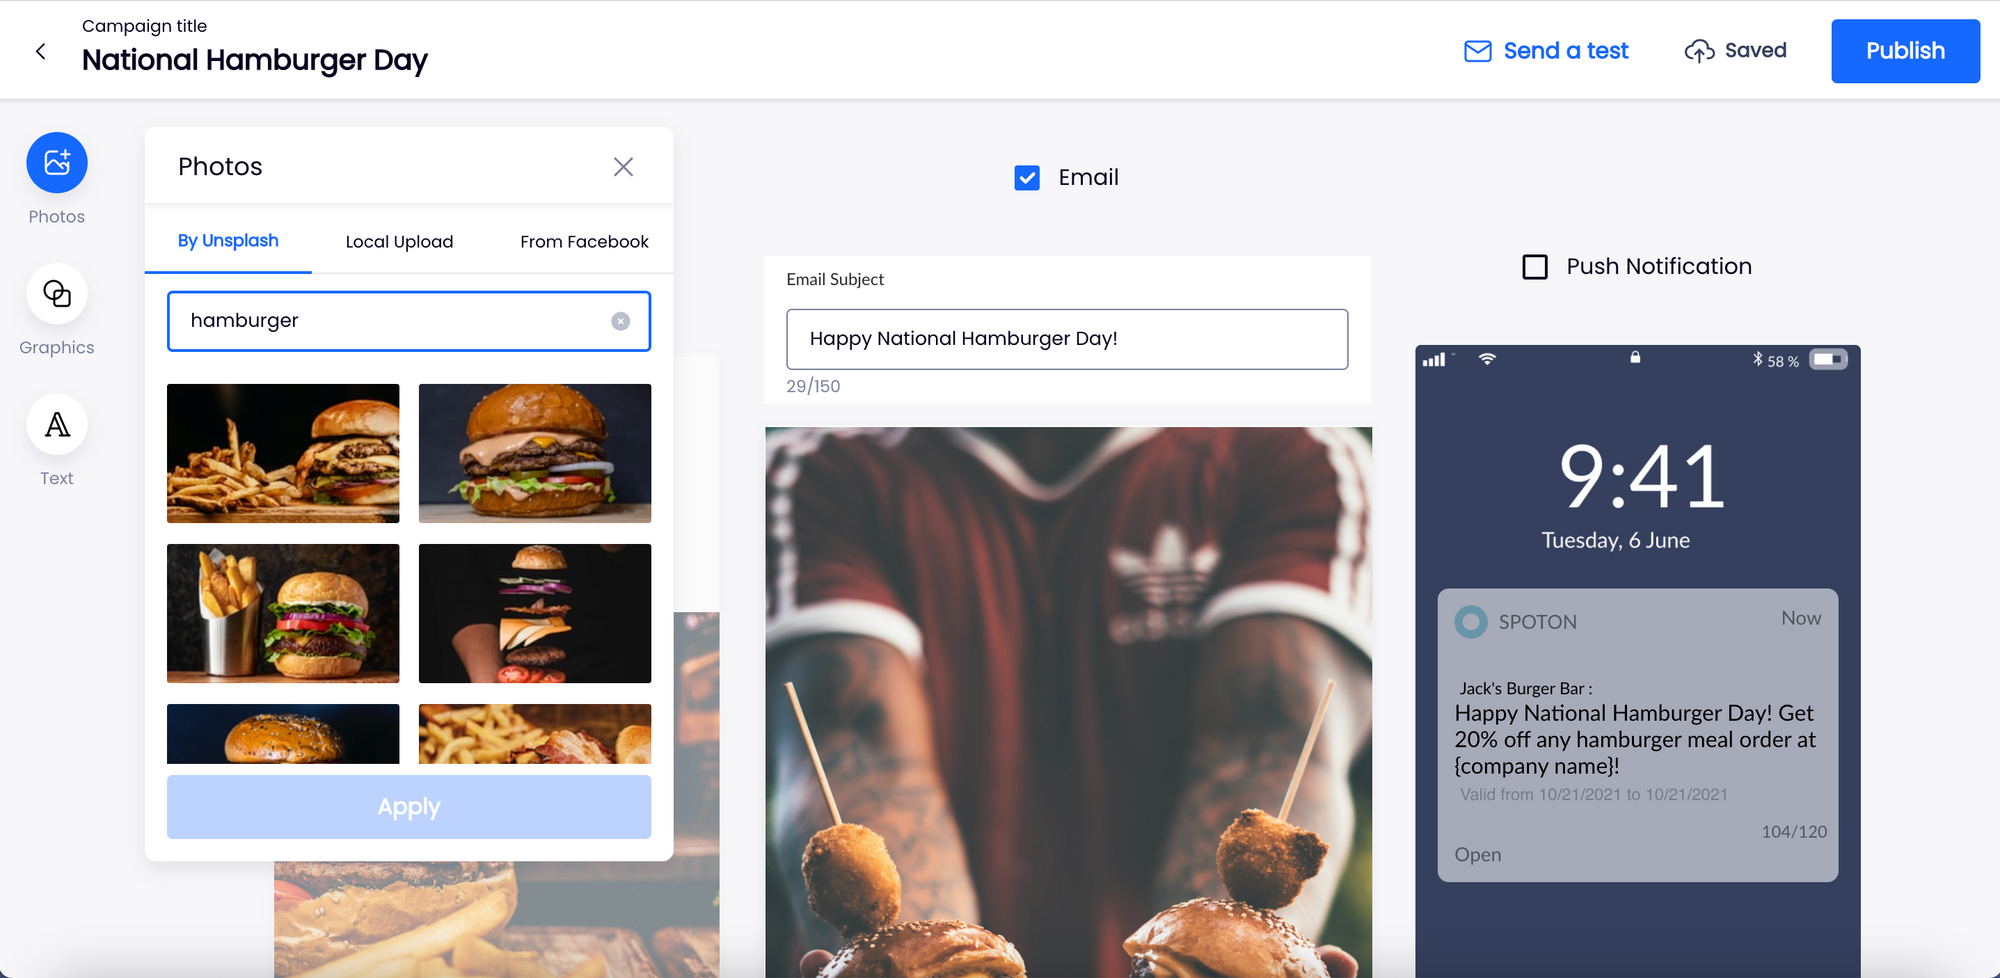 Stock hamburger images to choose from in SpotOn Marketing email marketing platform